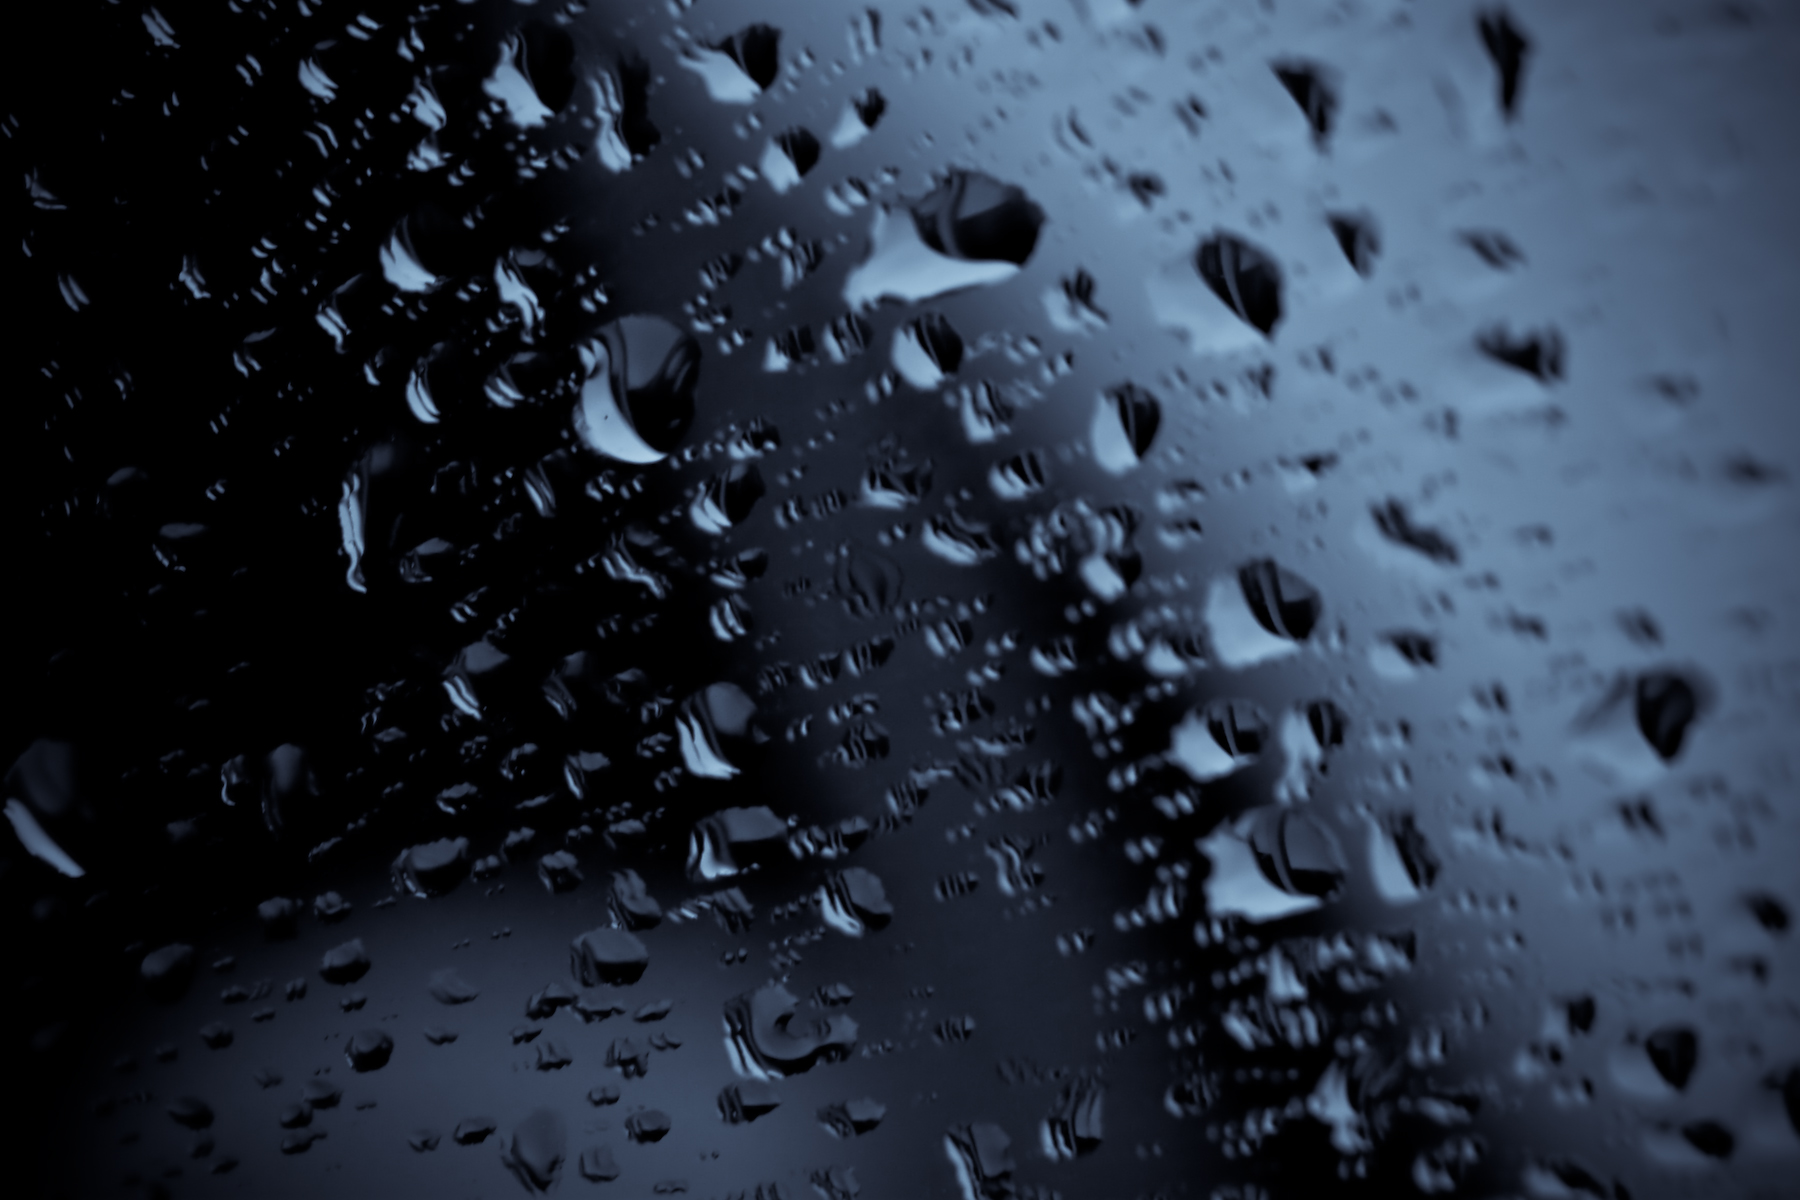 Droplets on glass photo